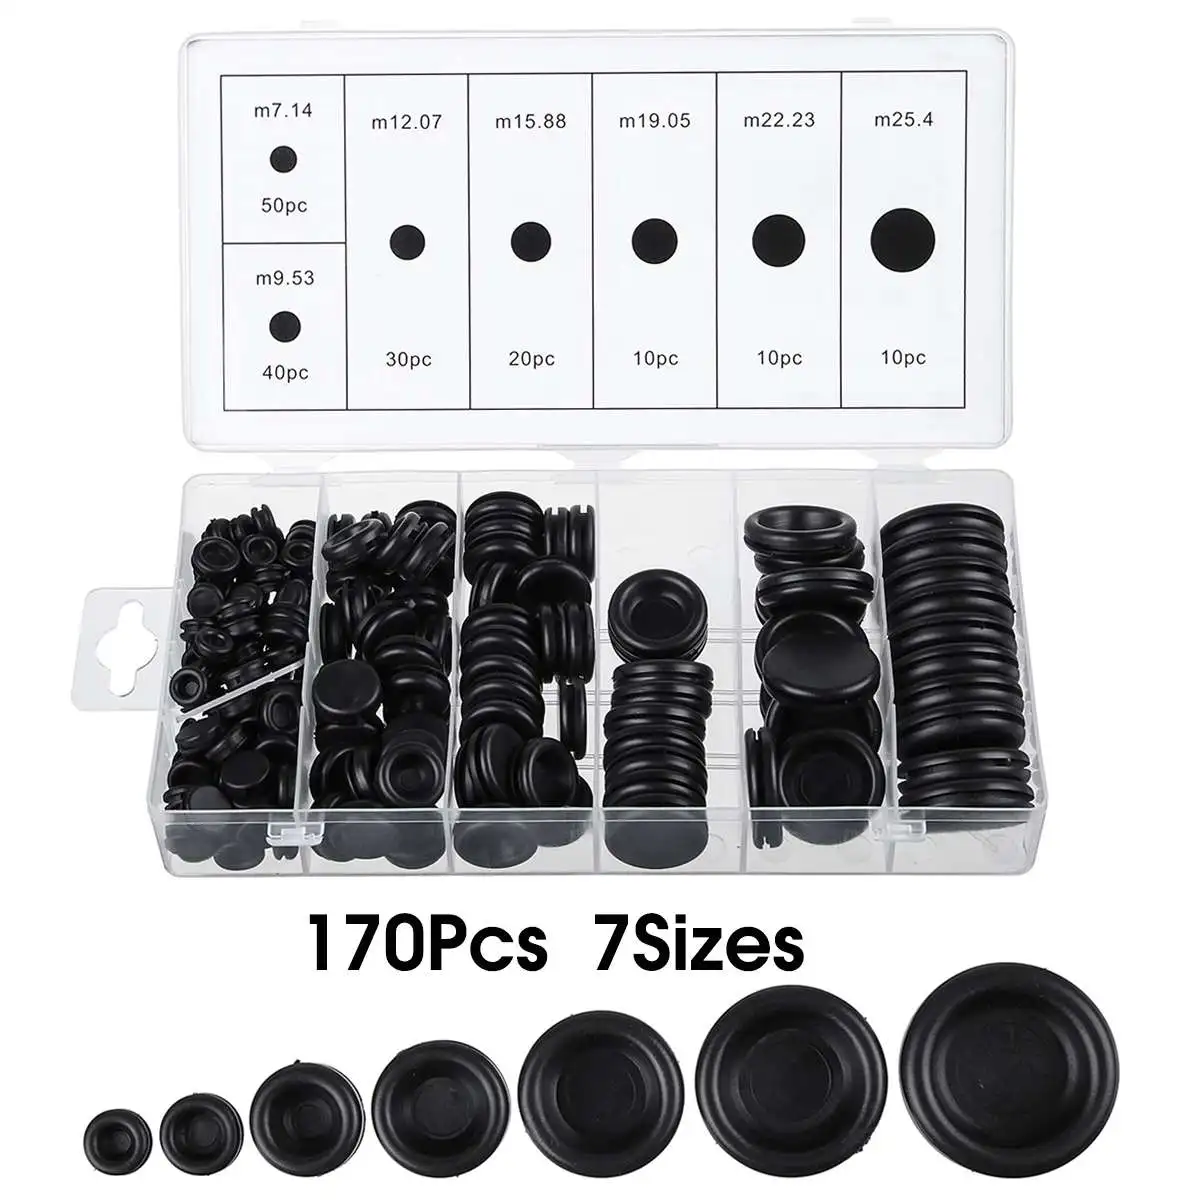 WeiMeet 170Pcs Rubber Grommet Firewall Hole Plug Set Car Electrical Wire Gasket Assorted Kit with Organizer Box for Car Machine Pump Water Pipe 7 Different Sizes